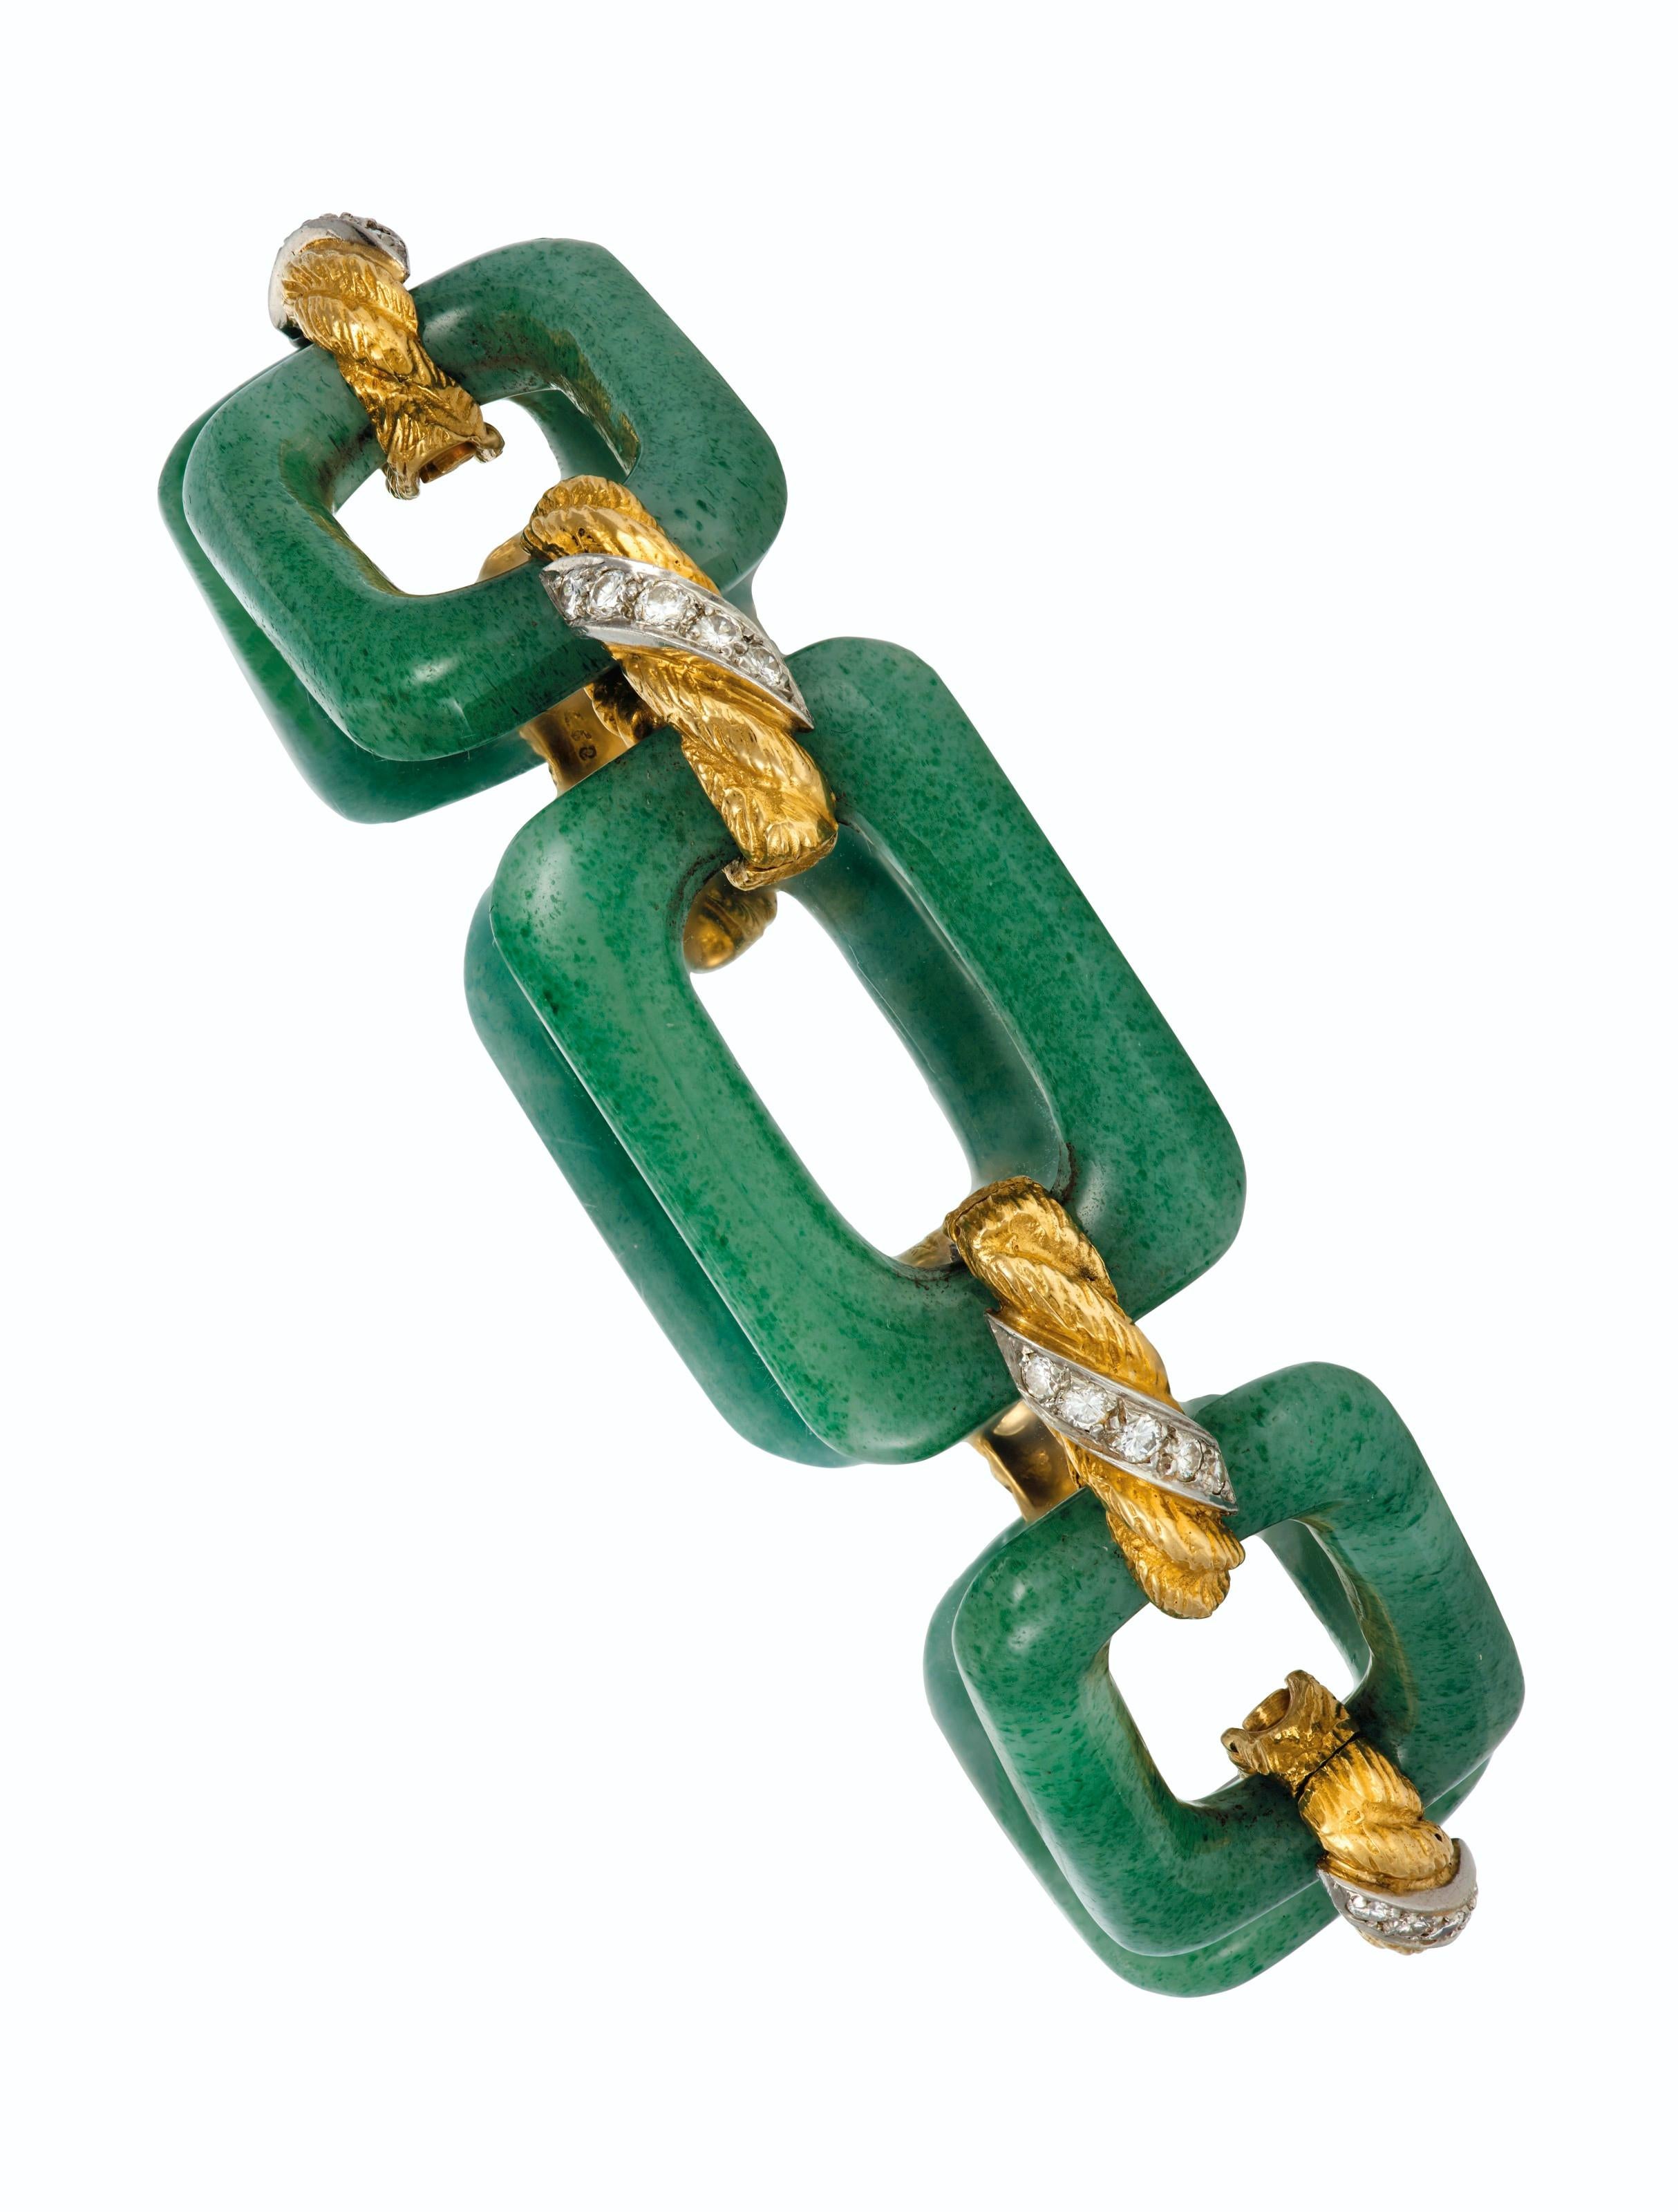 Polished aventurine quartz links, round diamonds, 18k yellow gold and platinum, circa 1970, signed VCA NY, numbered

Size/Dimensions: 21.5 x 2.0 cm (8 ½ x ¾ in)
Gross Weight: 46.9 grams